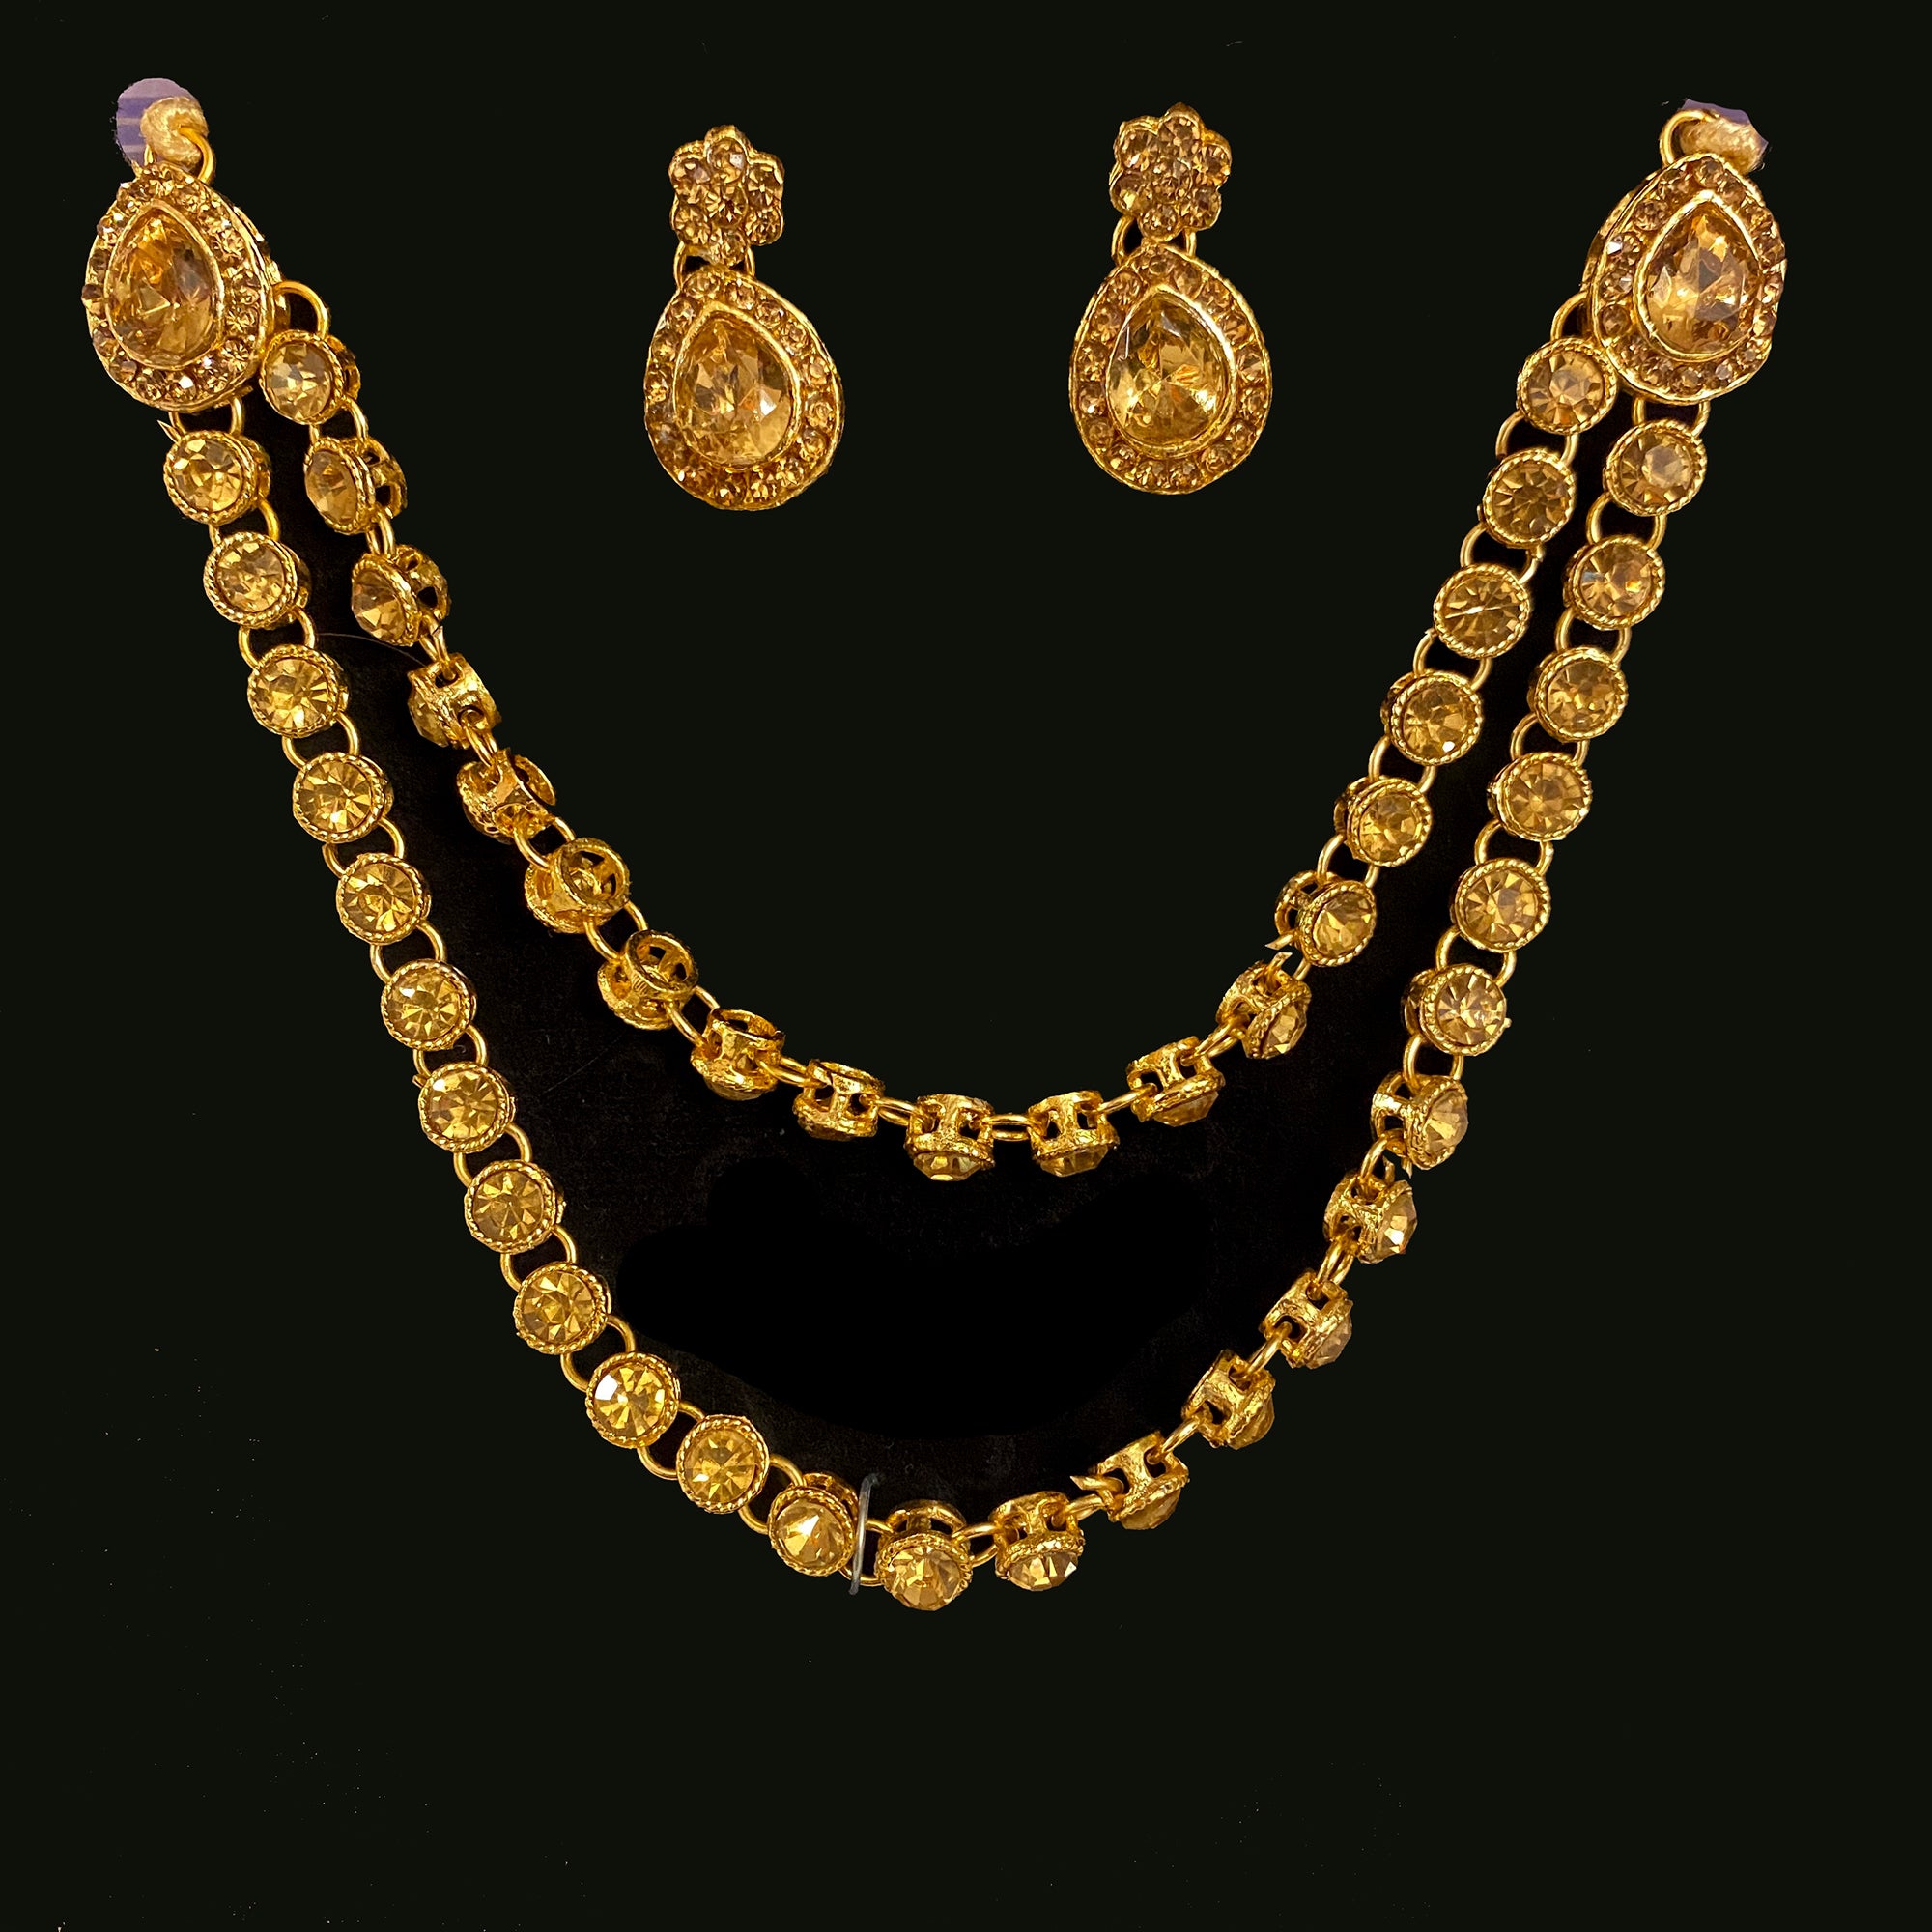 DT Gold Choker & Earring Set - Vintage India NYC